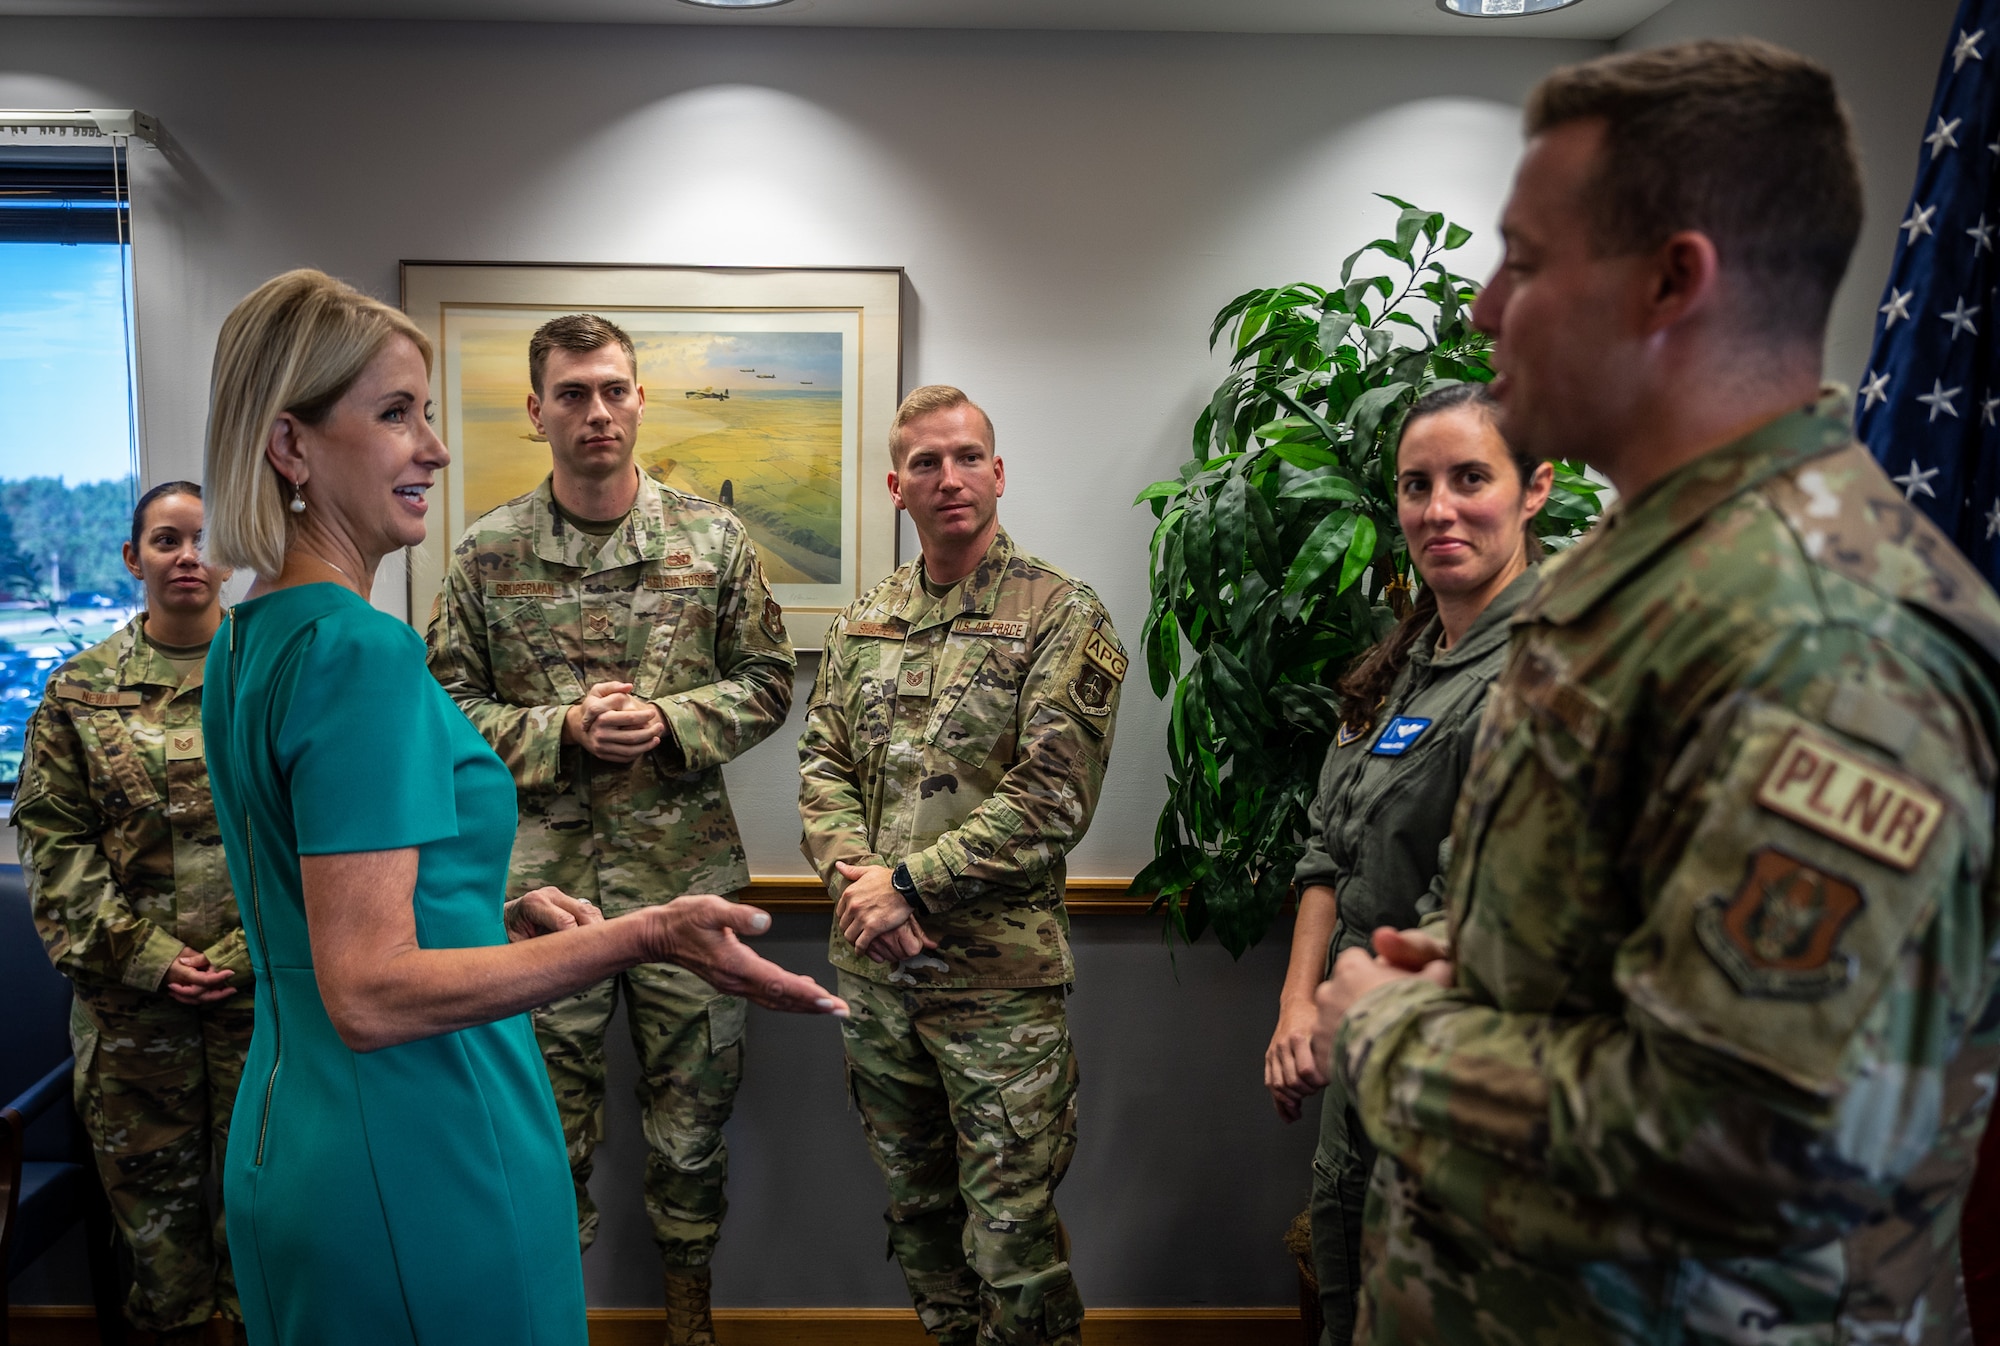 U.S. Congresswoman (R-IL) Mary Miller along with members of her staff, William Wadsworth, Deputy Chief of Staff, and Patrick Farrell, District Director, meet with Col. Rick Chadwick, 932nd Airlift Wing commander, Chief Master Sgt. Christian Biancur, 932nd AW command chief, and 932nd AW group representatives during Miller’s first visit to Scott Air Force Base and the 932nd AW, Aug. 28, 2023. “I had the honor of visiting the 932nd Airlift Wing at Scott Air Force Base this week,” said Miller. “I appreciated the opportunity to learn more about the Wing and its importance to the Air Force's mission, and the local community in Illinois.” (U.S. Air Force photo by Christopher Parr)